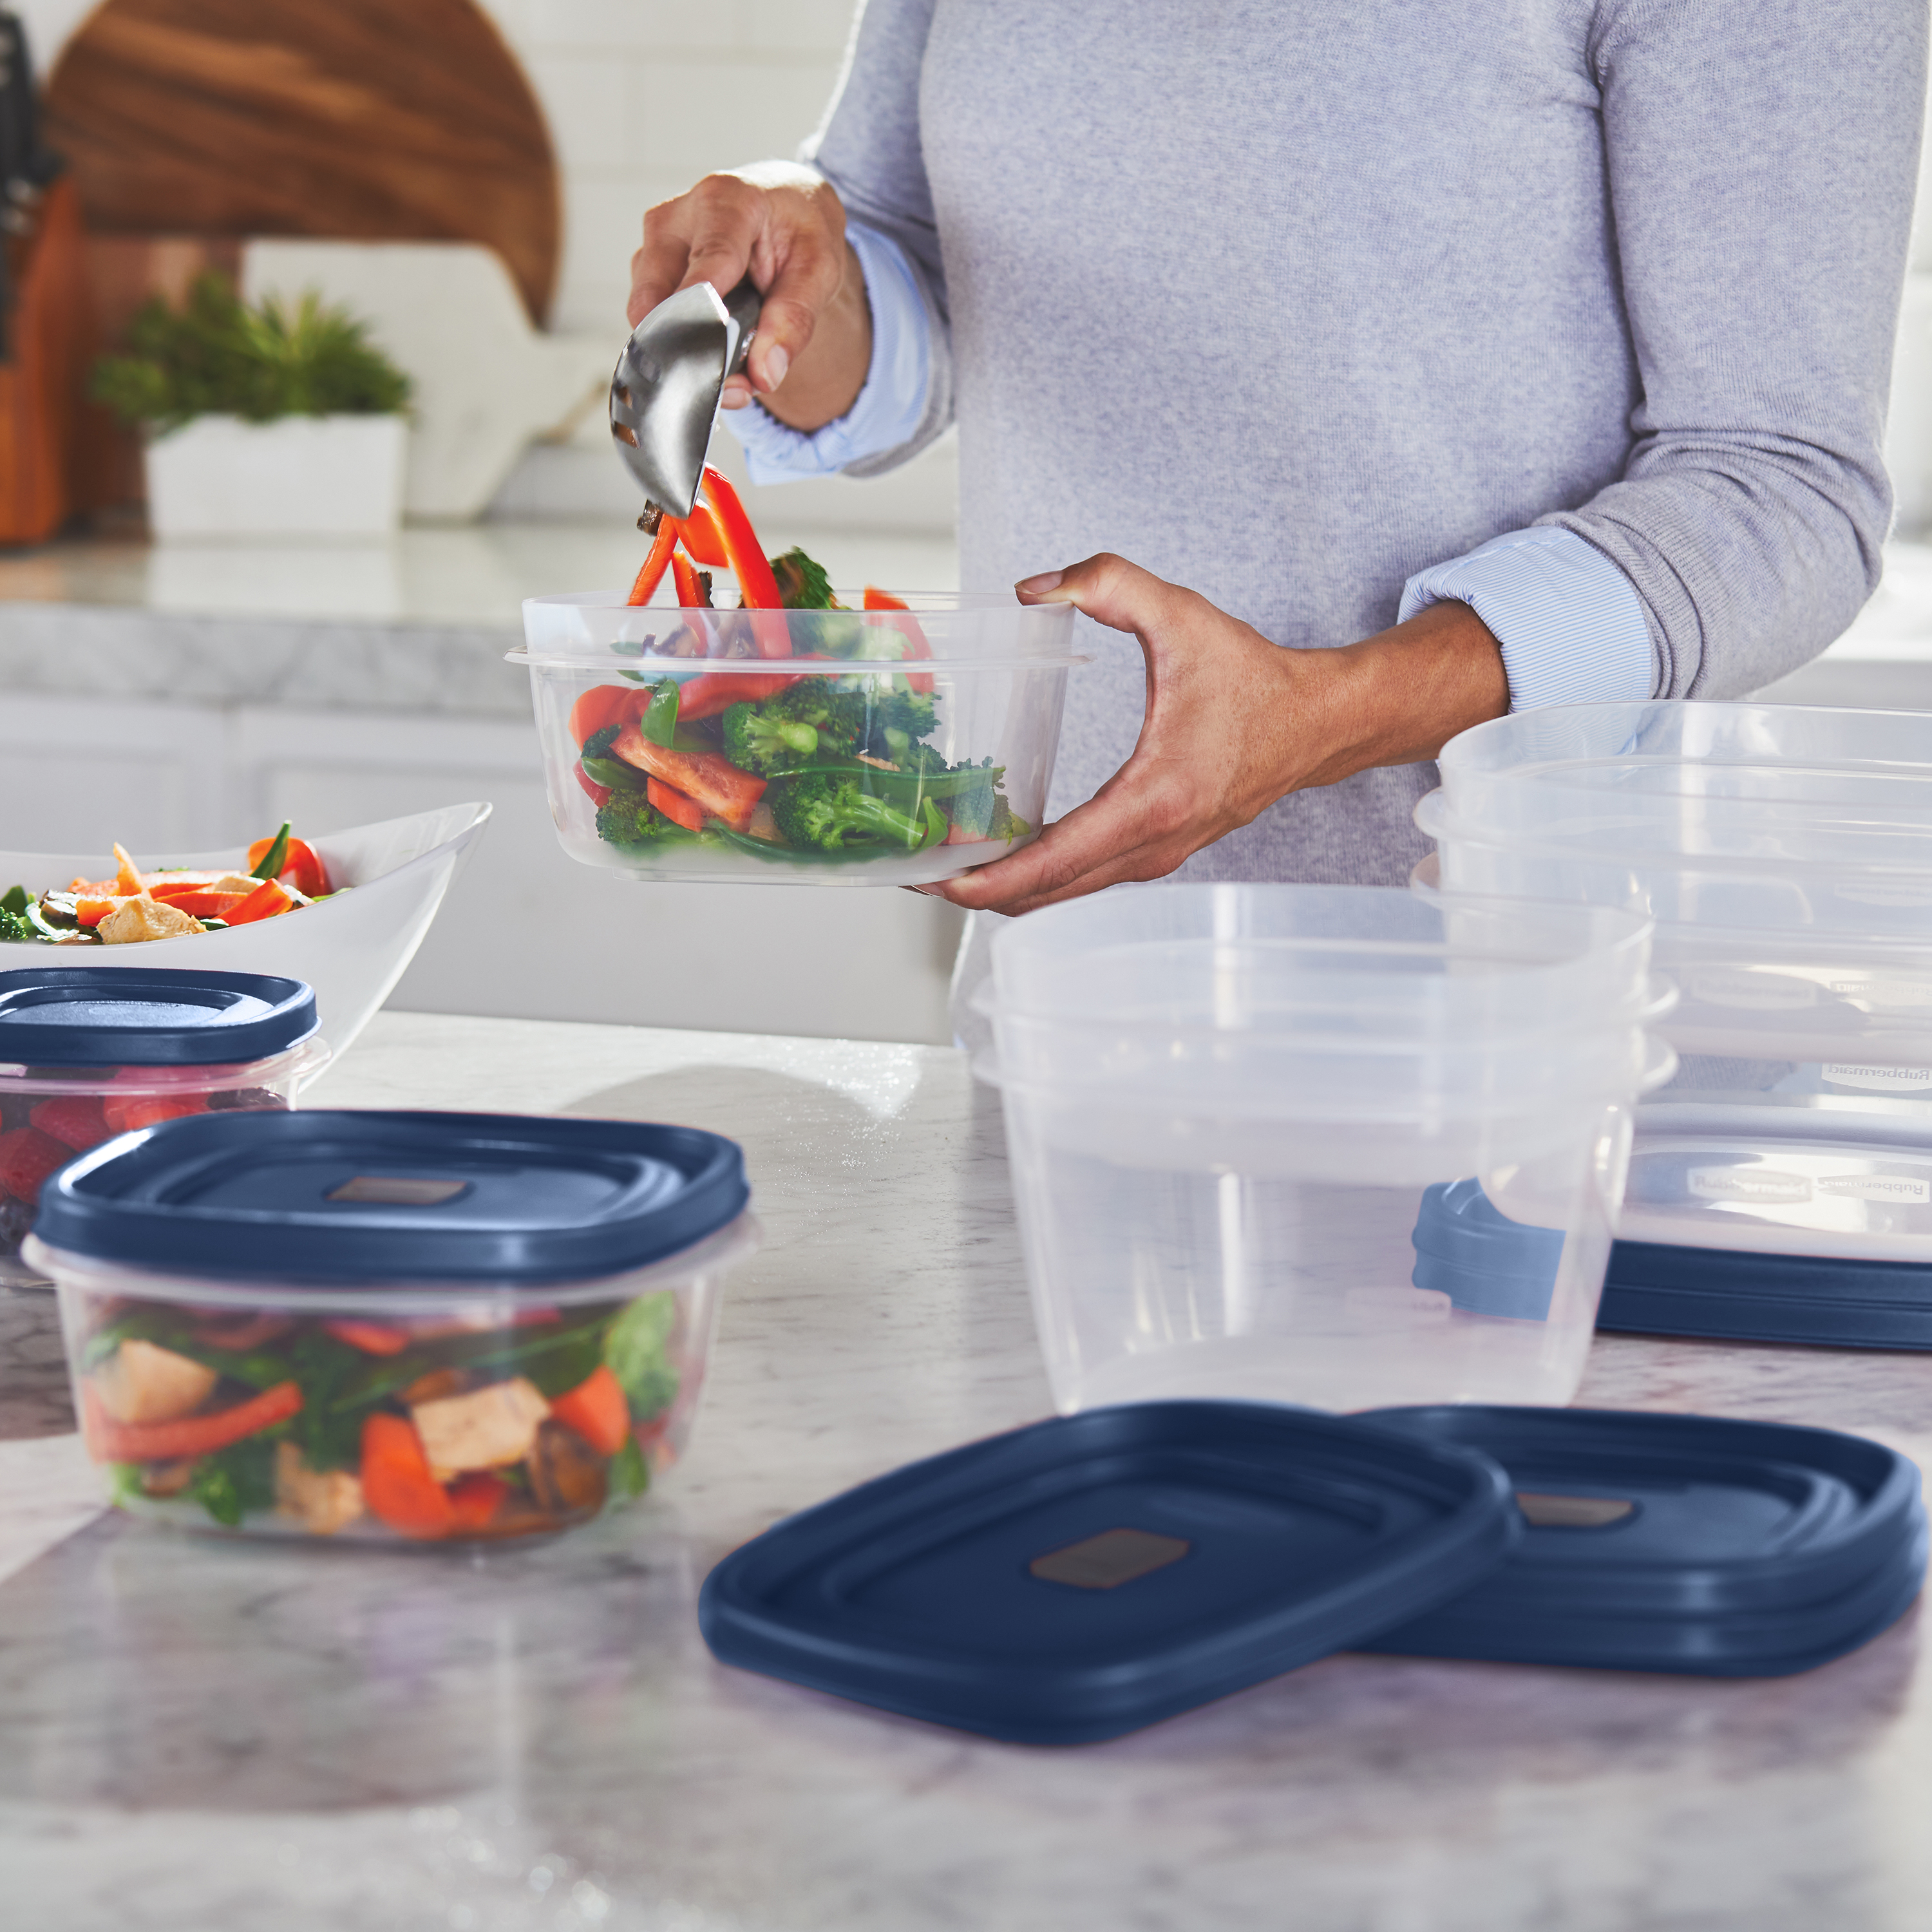 Rubbermaid EasyFindLids Variety Set of 13 Vented Plastic Food Storage Containers with Navy Lids (26 Pieces Total) - image 2 of 7